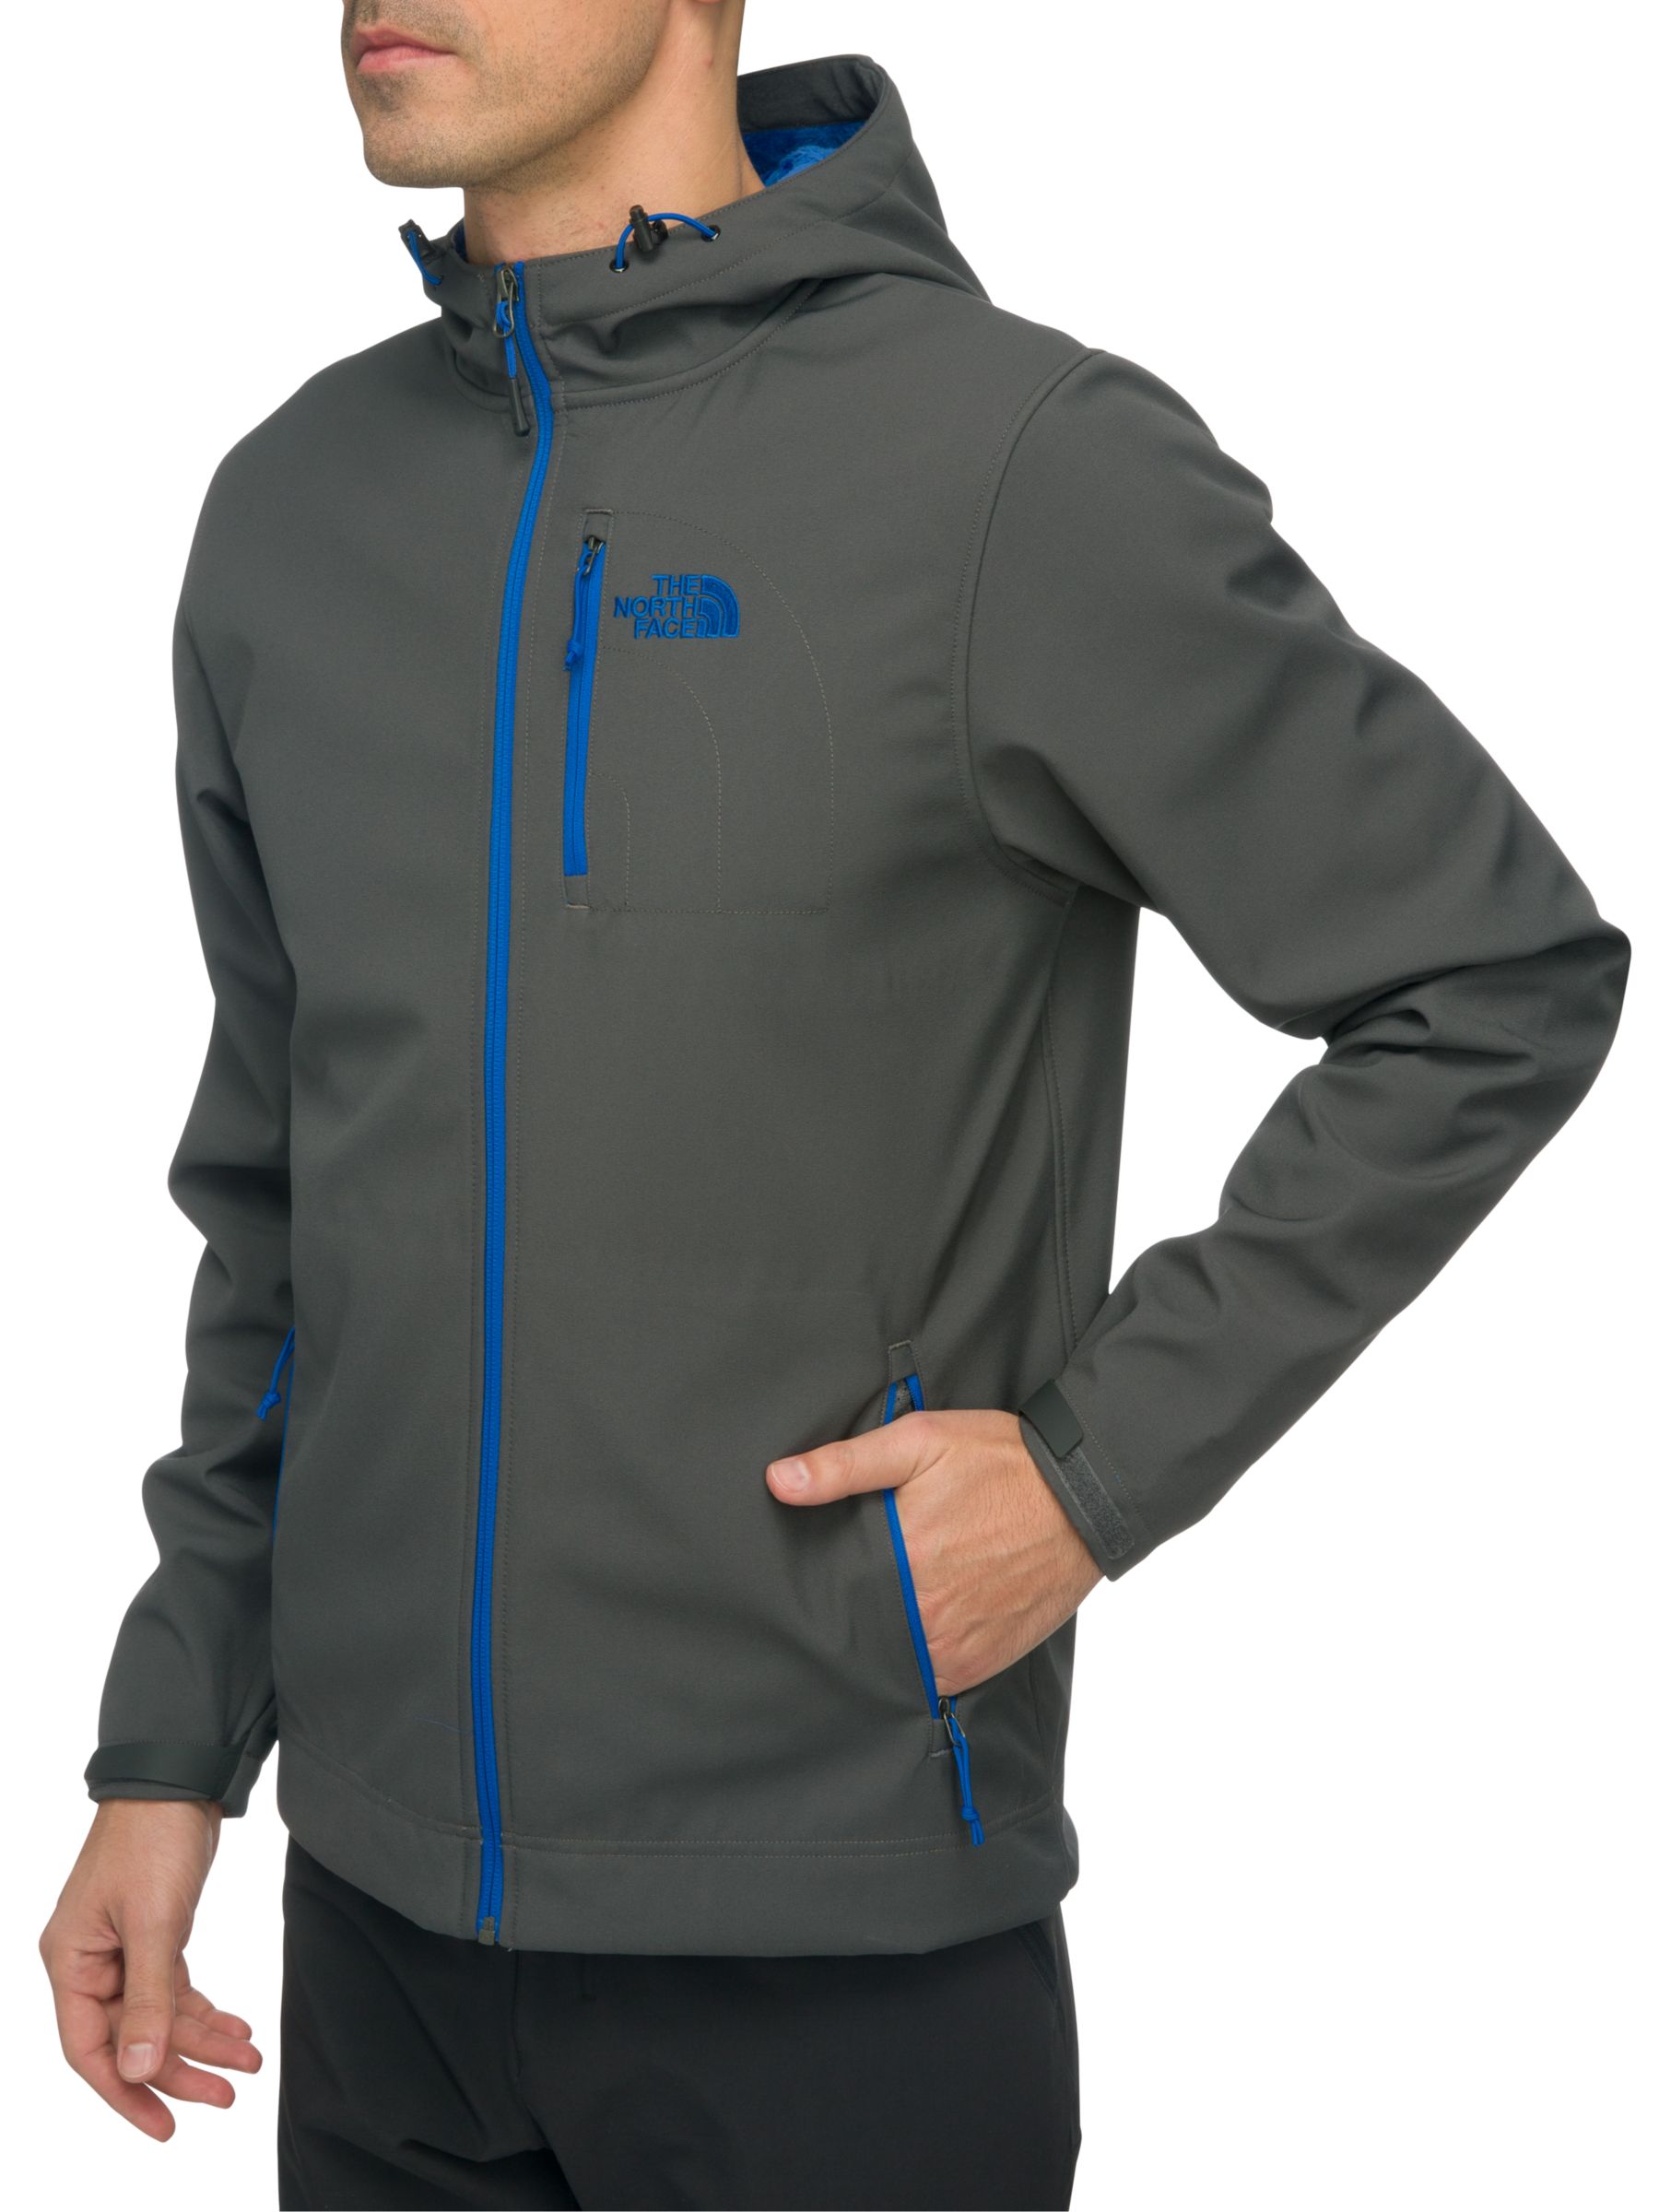 the north face durango hoodie jacket